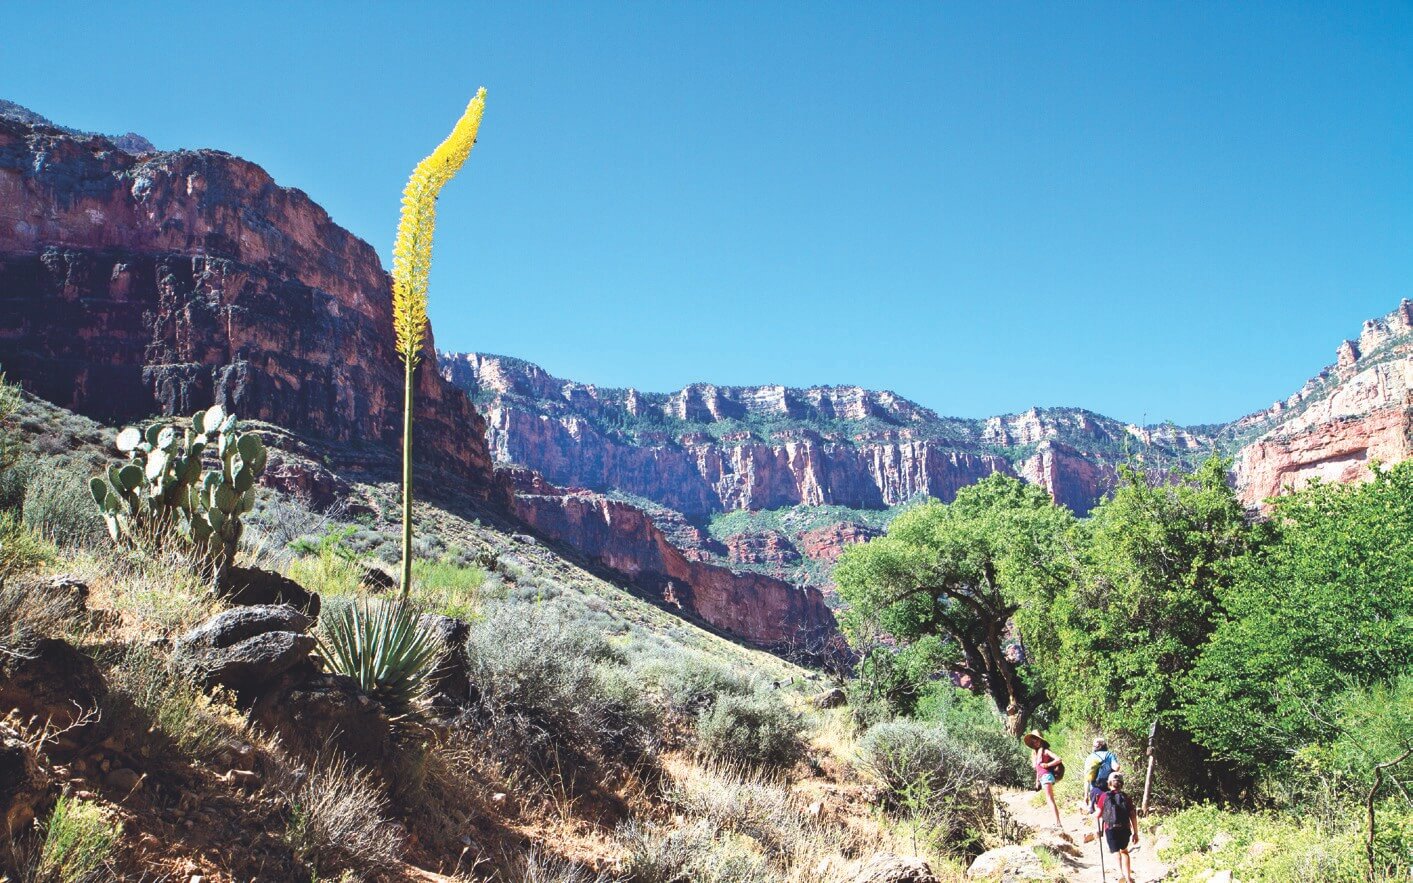 A Century plant stands tall in Grand Canyon.